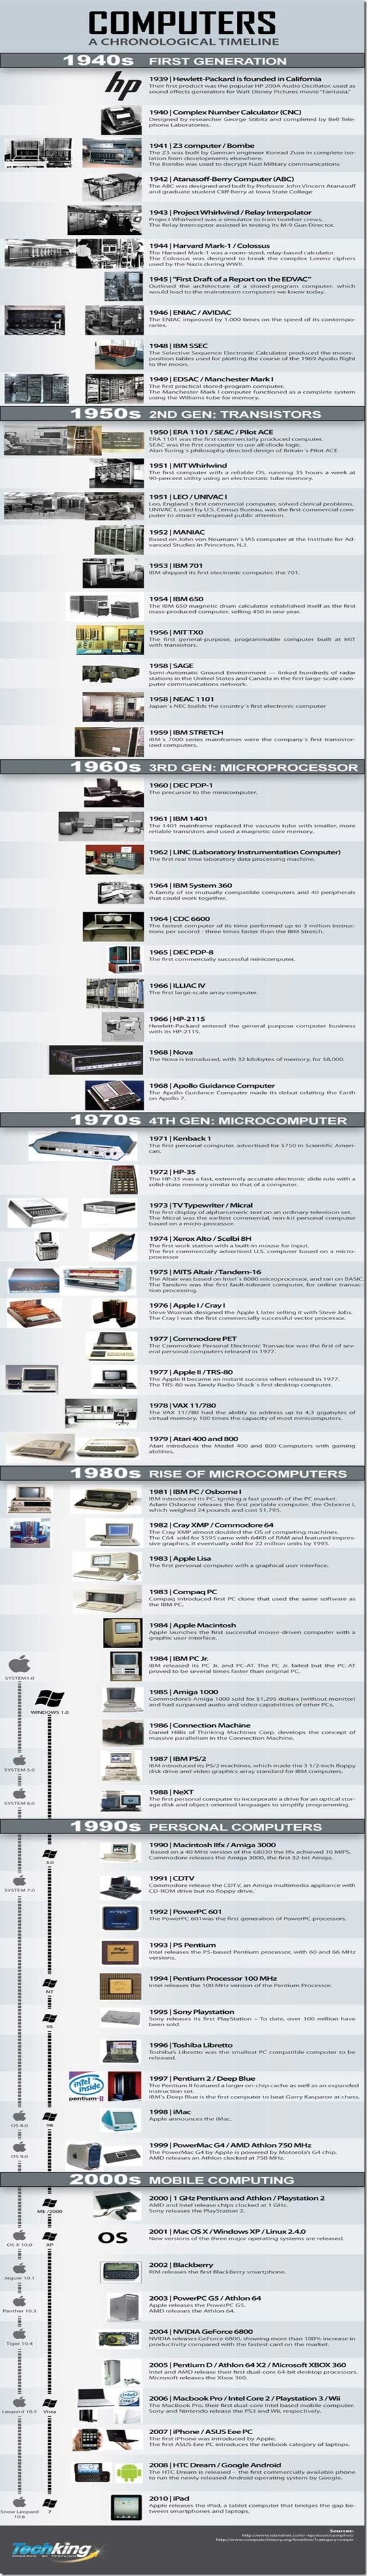 The History of Computers | #infographic